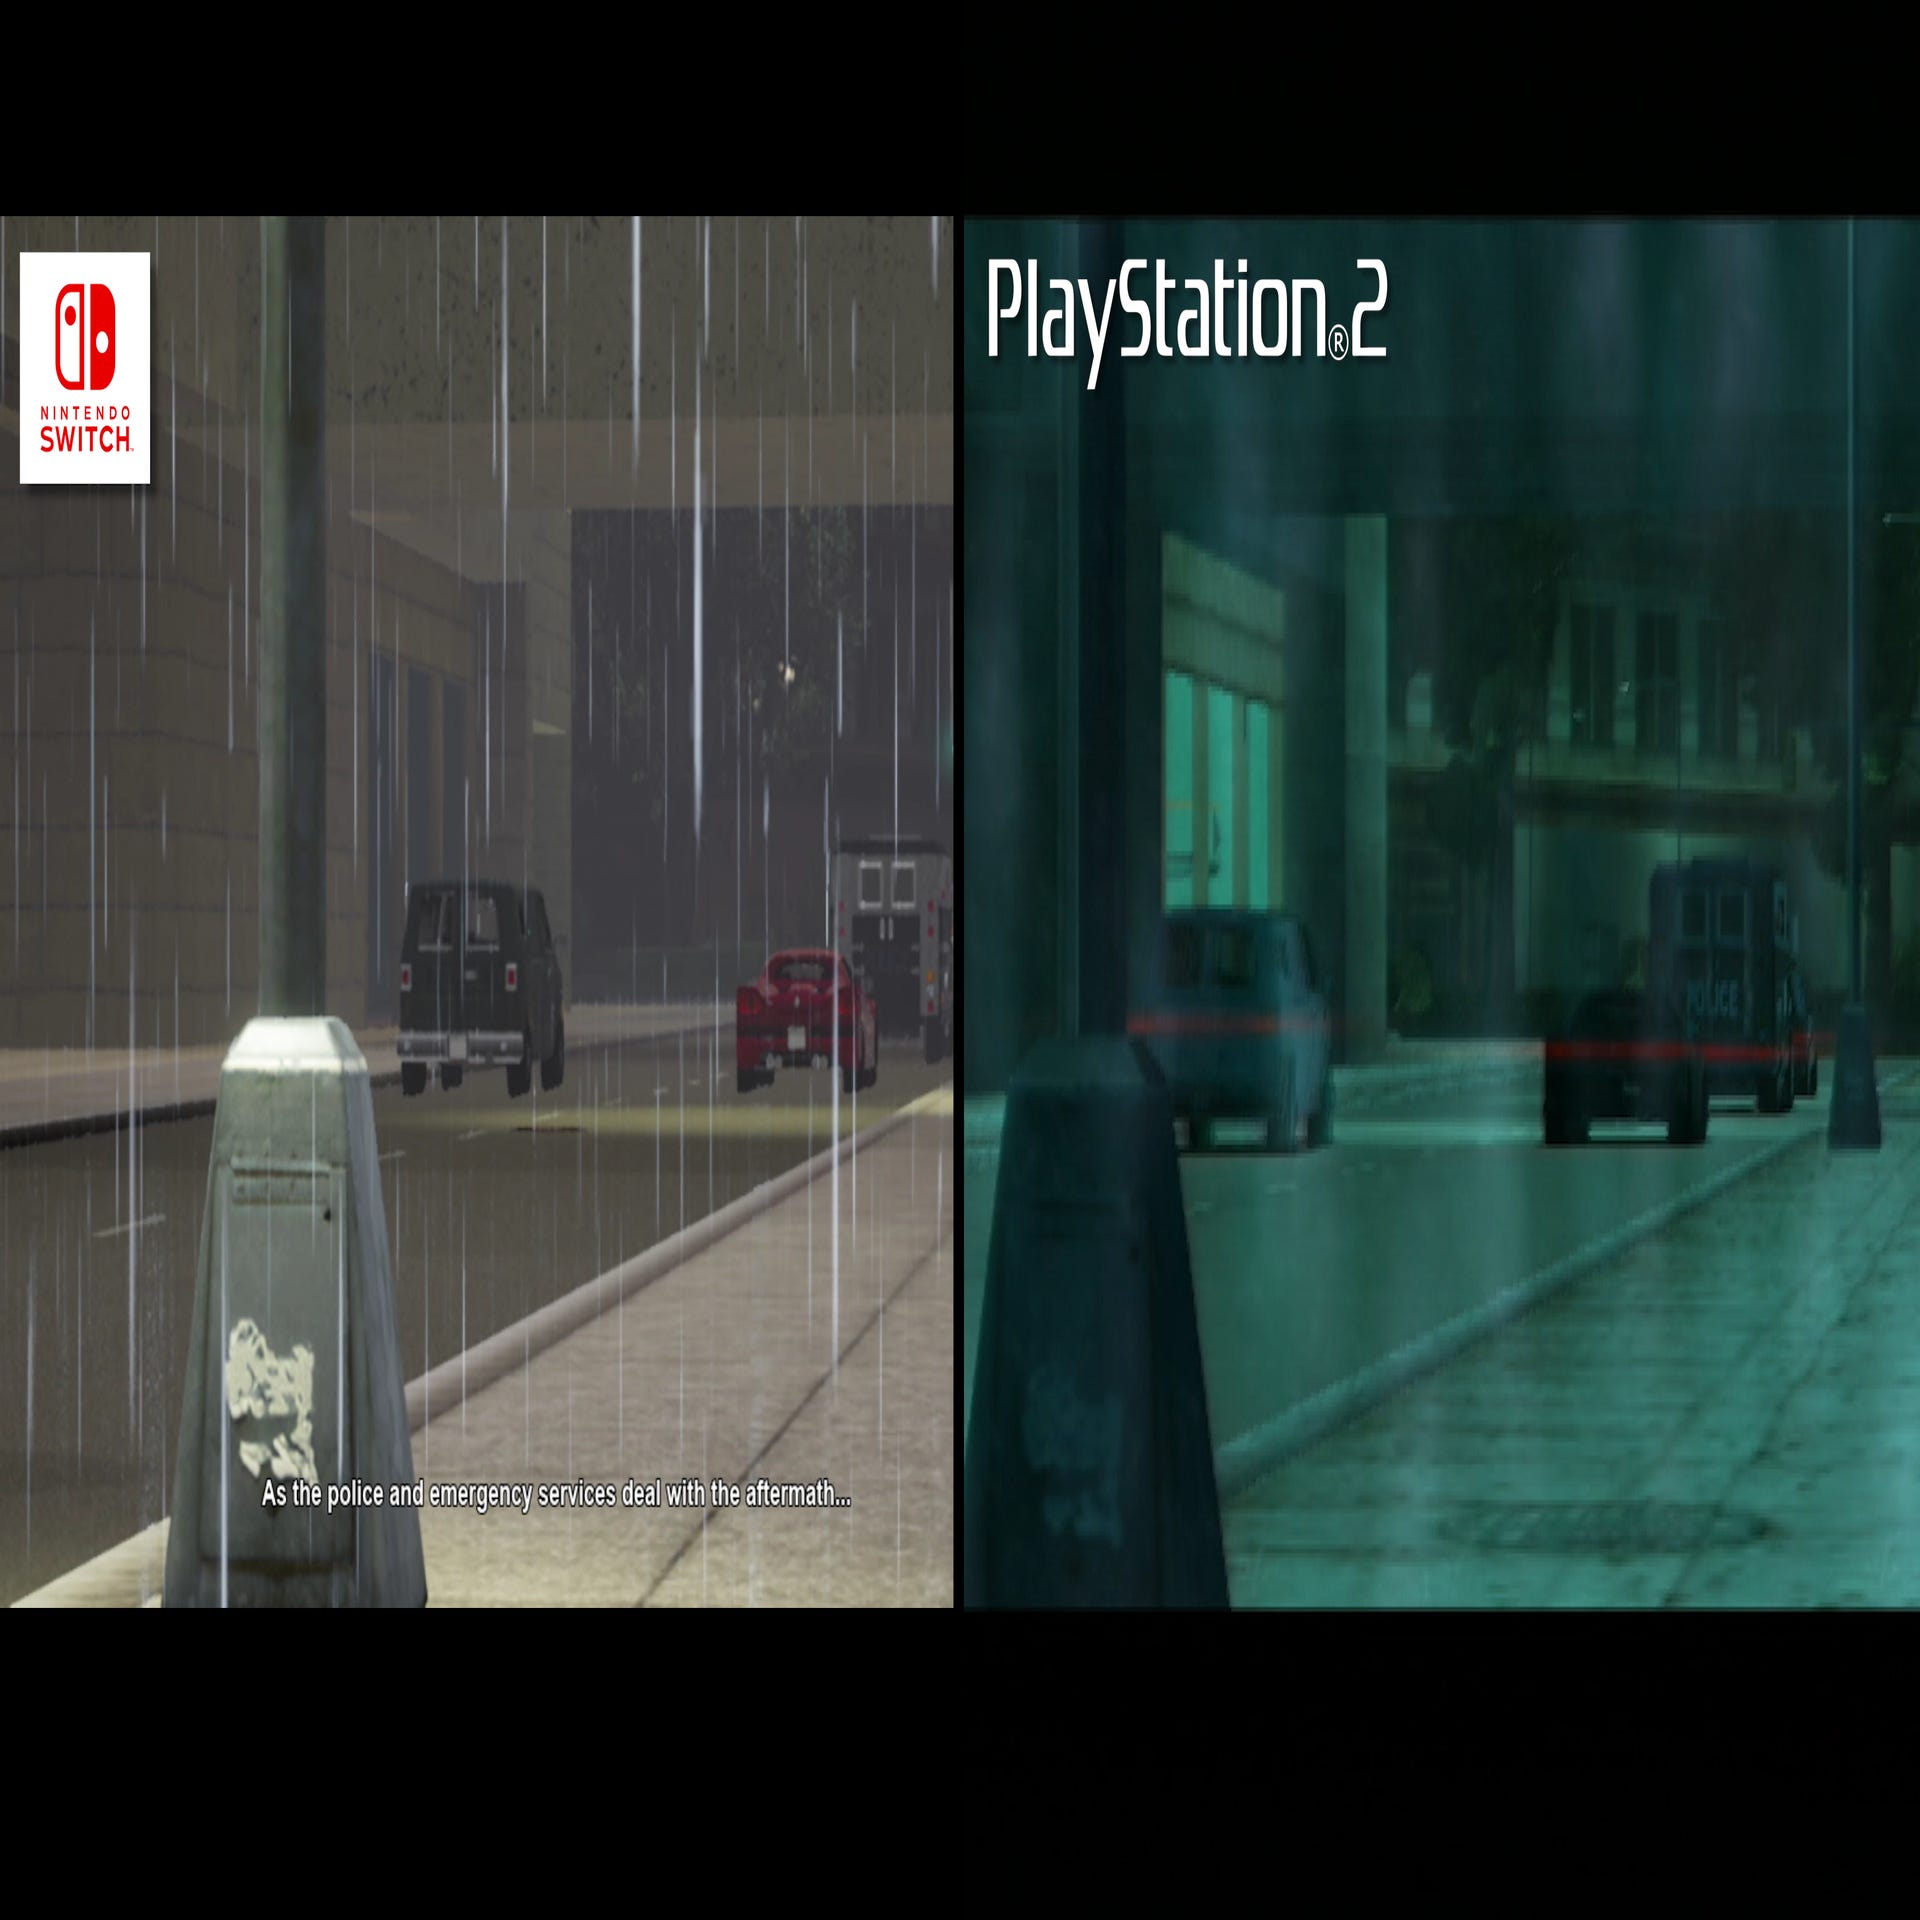 GTA 3 vs. GTA VICE CITY- SIDE BY SIDE GRAPHICS AND GAMEPLAY